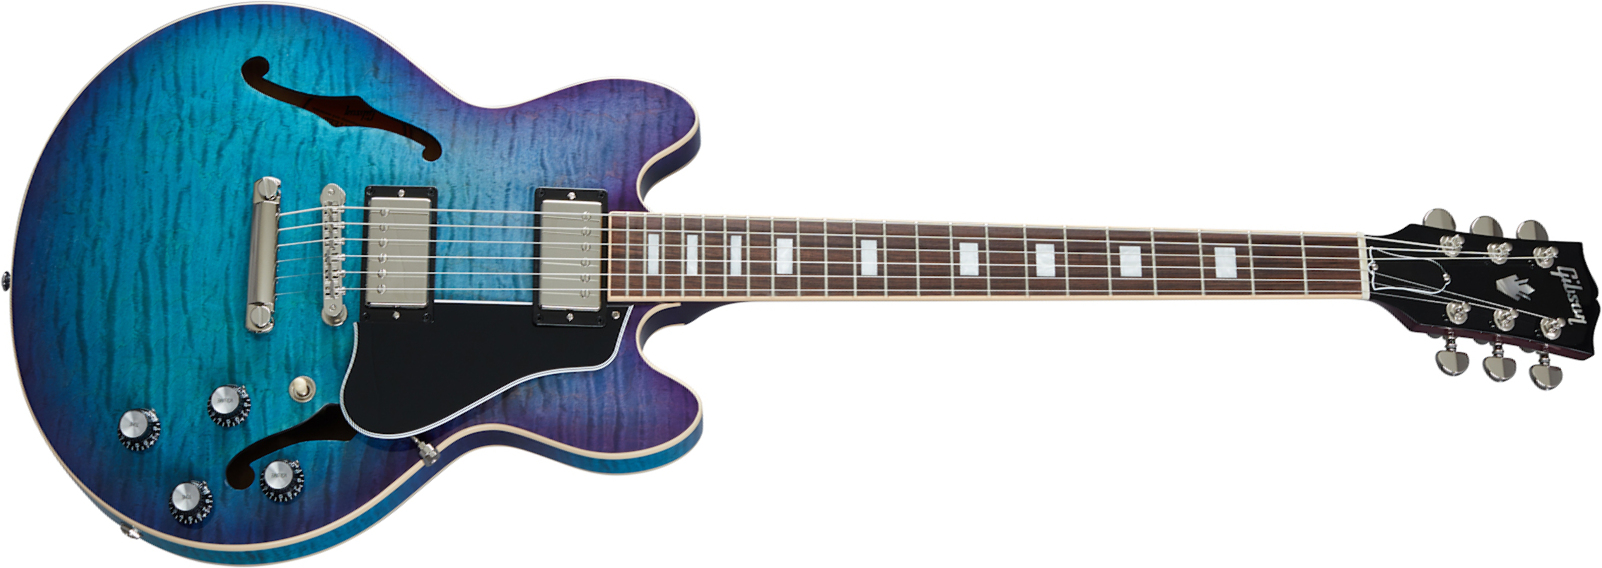 Gibson Es-339 Figured Modern 2020 2h Ht Rw - Blueberry Burst - Semi-hollow electric guitar - Main picture